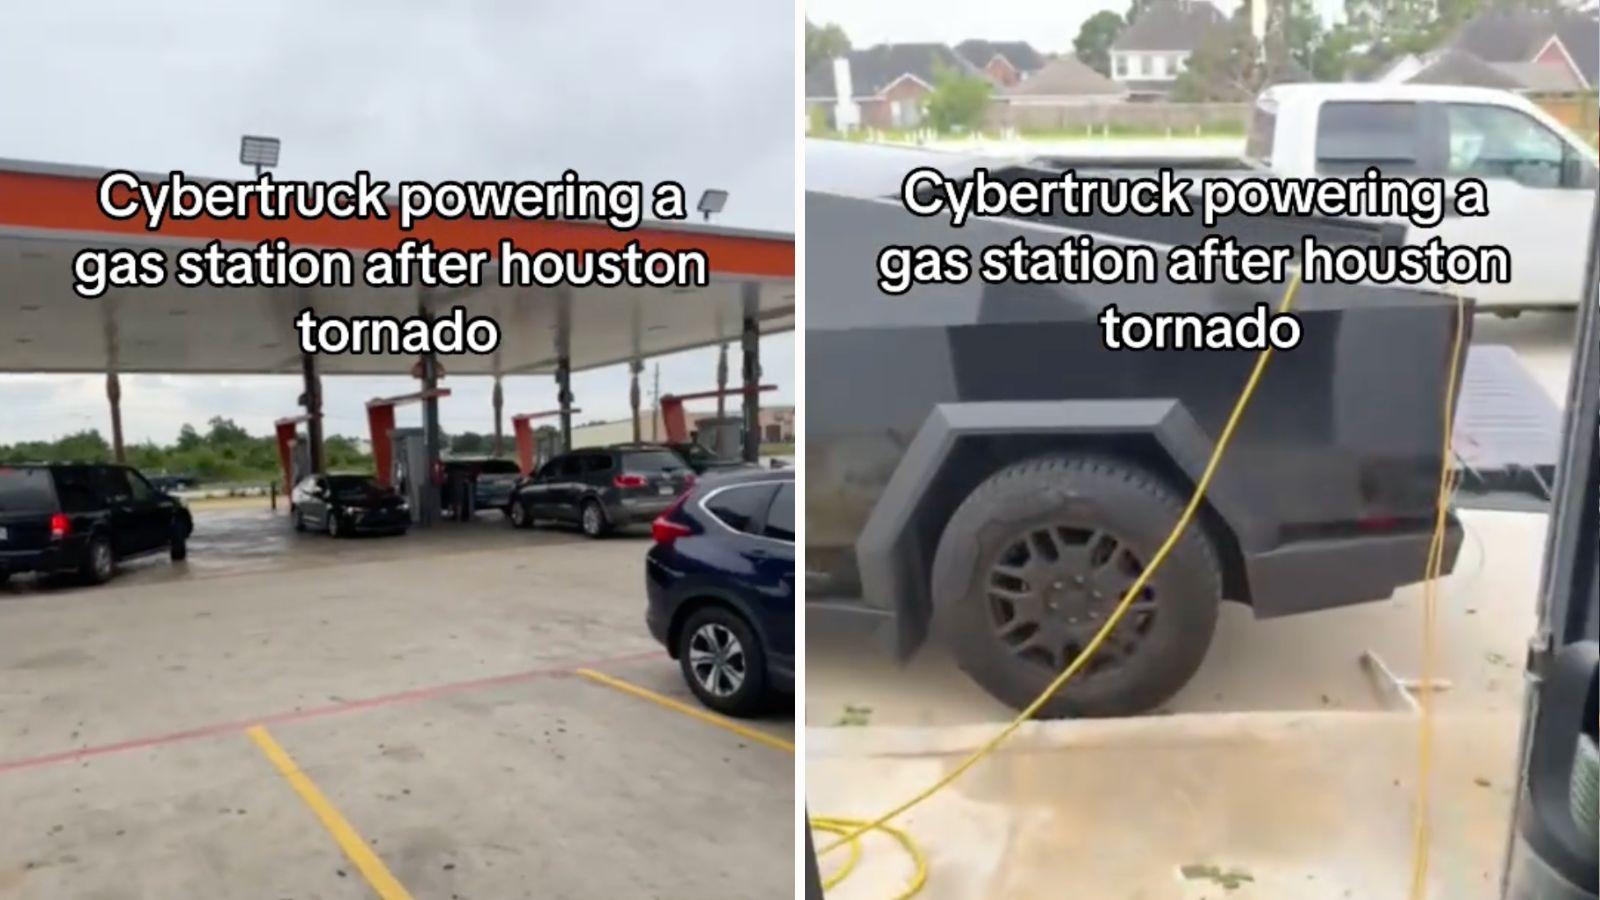 Cybertruck powers gas station after storm